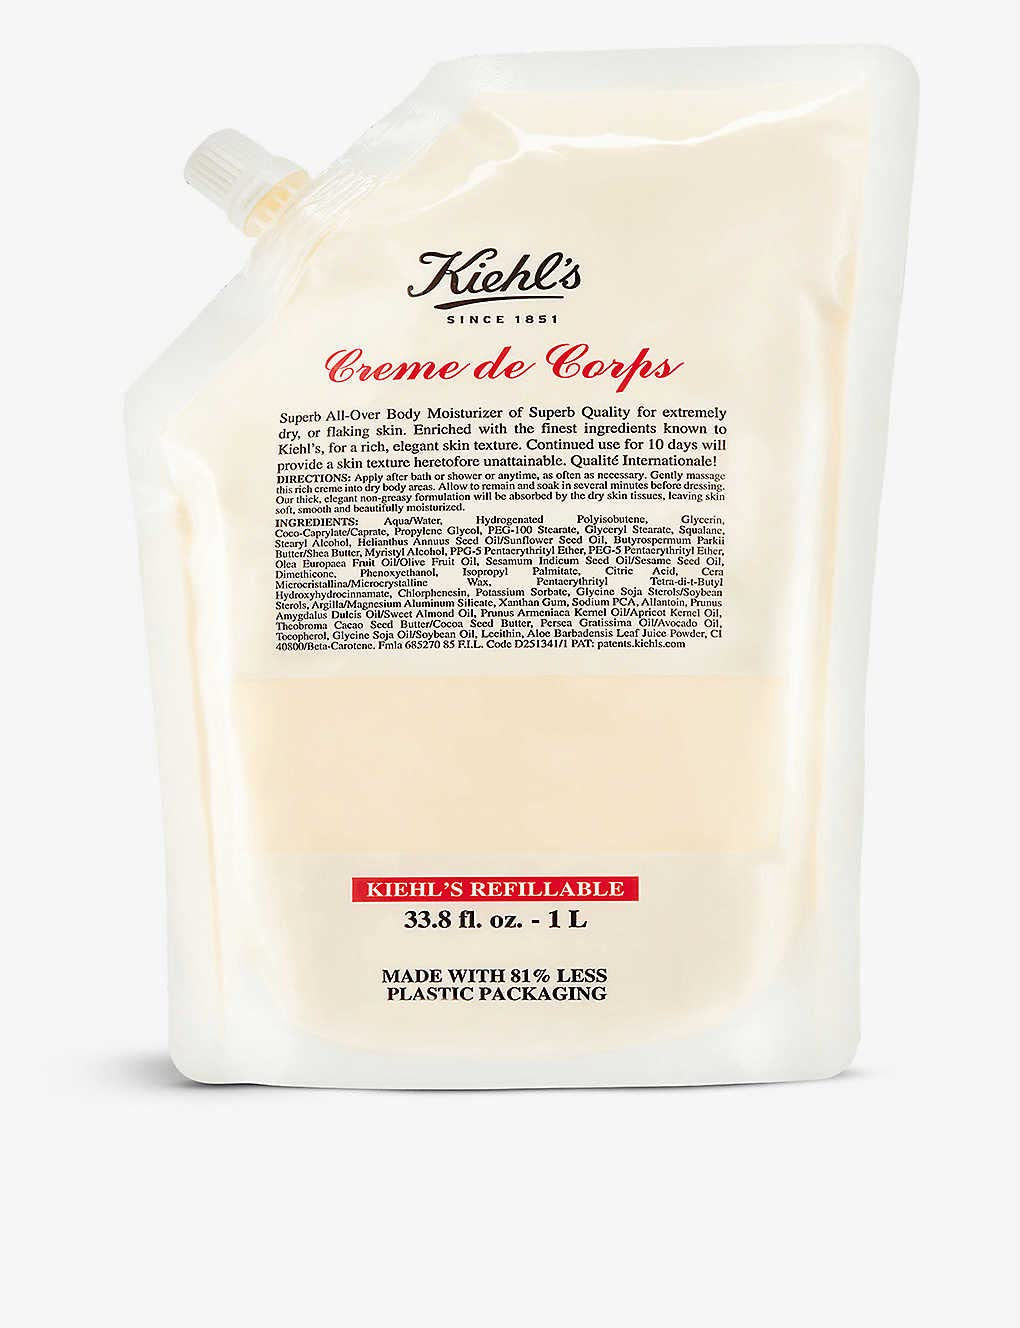 Kiehl'S Creme De Corps, Rich, Luscious Body Lotion, with Cocoa Butter and Shea Butter for Fast Absorbing Hydration, Skin Feels Soft and Smooth, Suitable for All Skin Types - 33.8 Fl Oz /1 Liter Refill